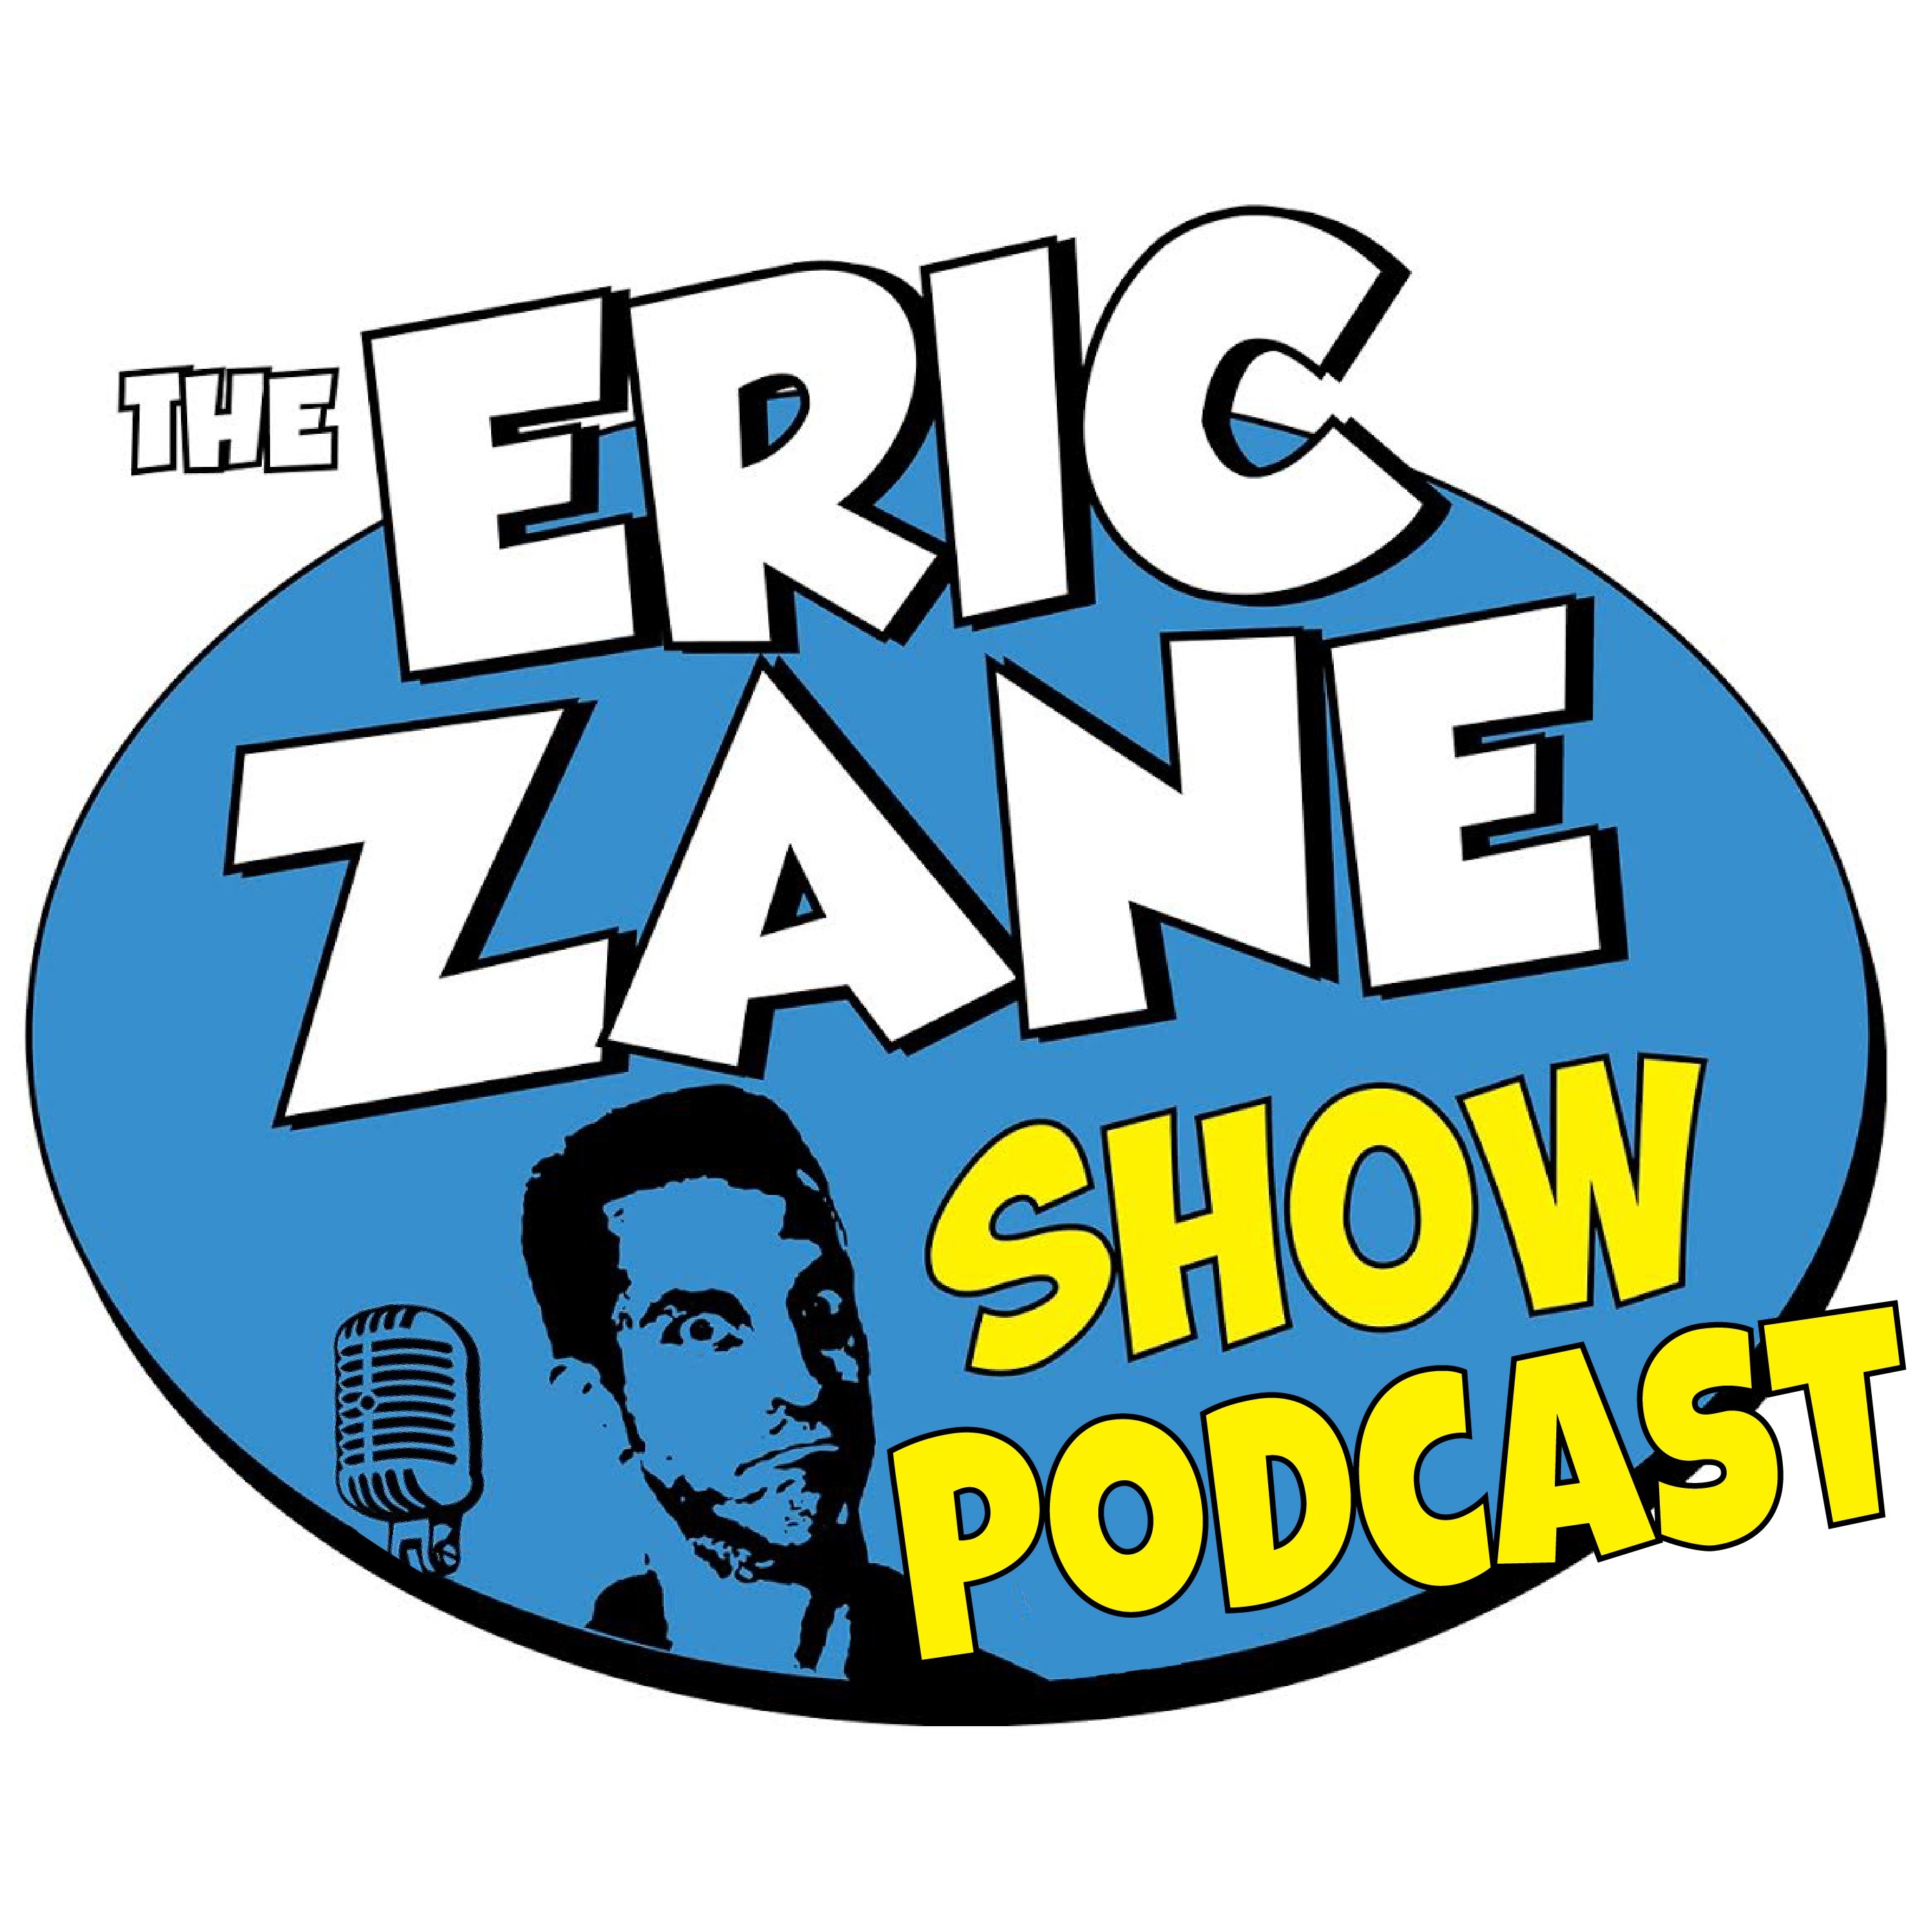 Best of the Eric Zane Show Podcast 5/25/22